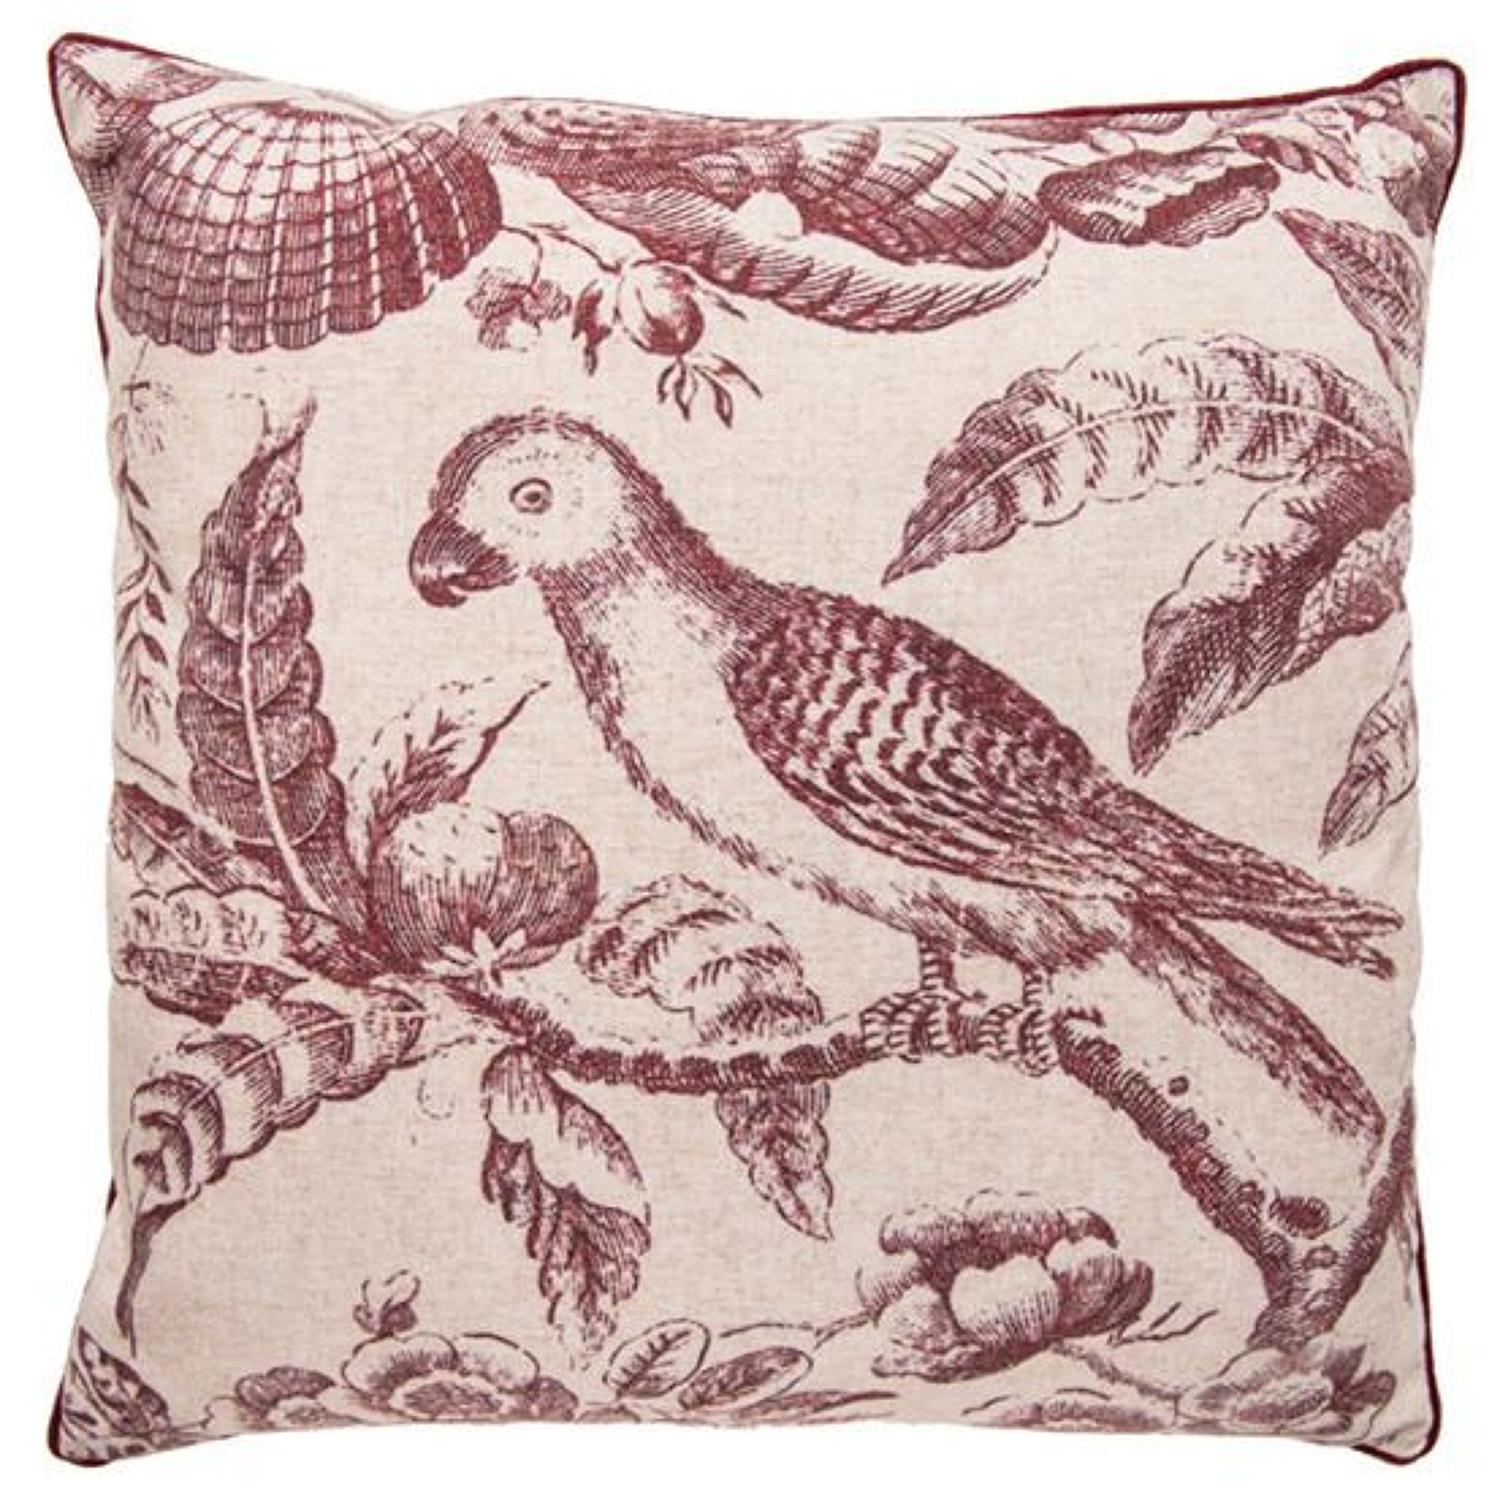 India Jane V&A Parrot Toile Cushion Cover.